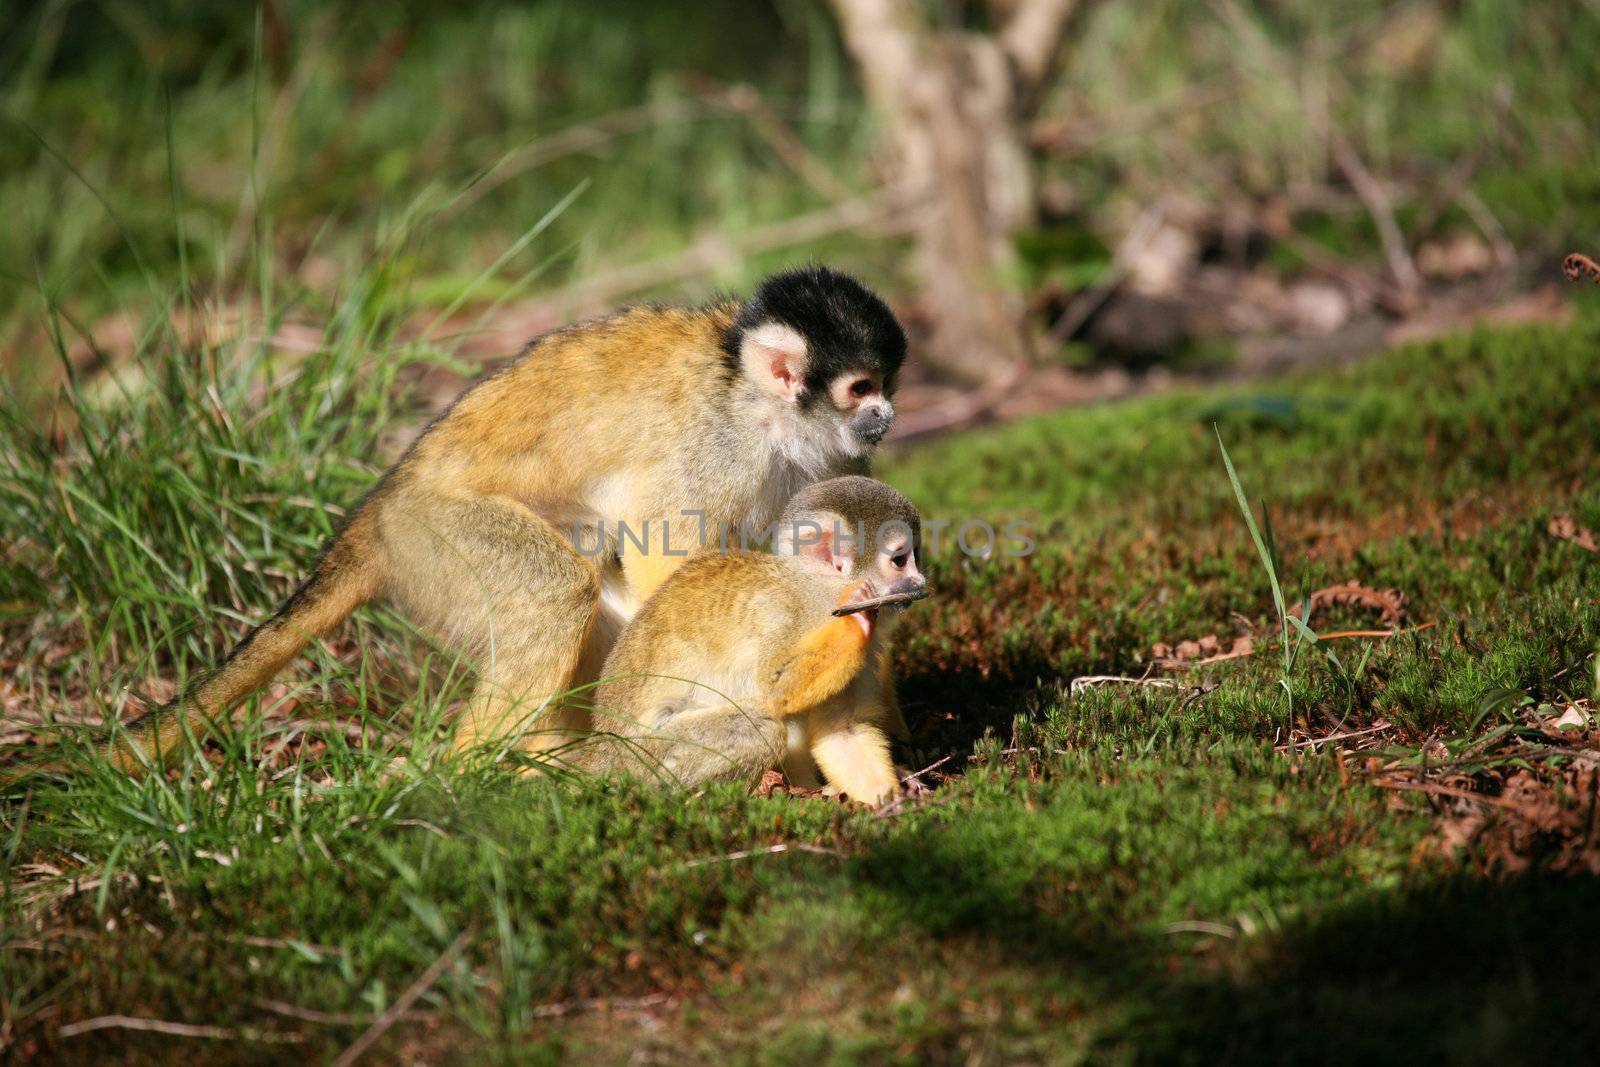 Young squirrelmonkey venturing out with mom